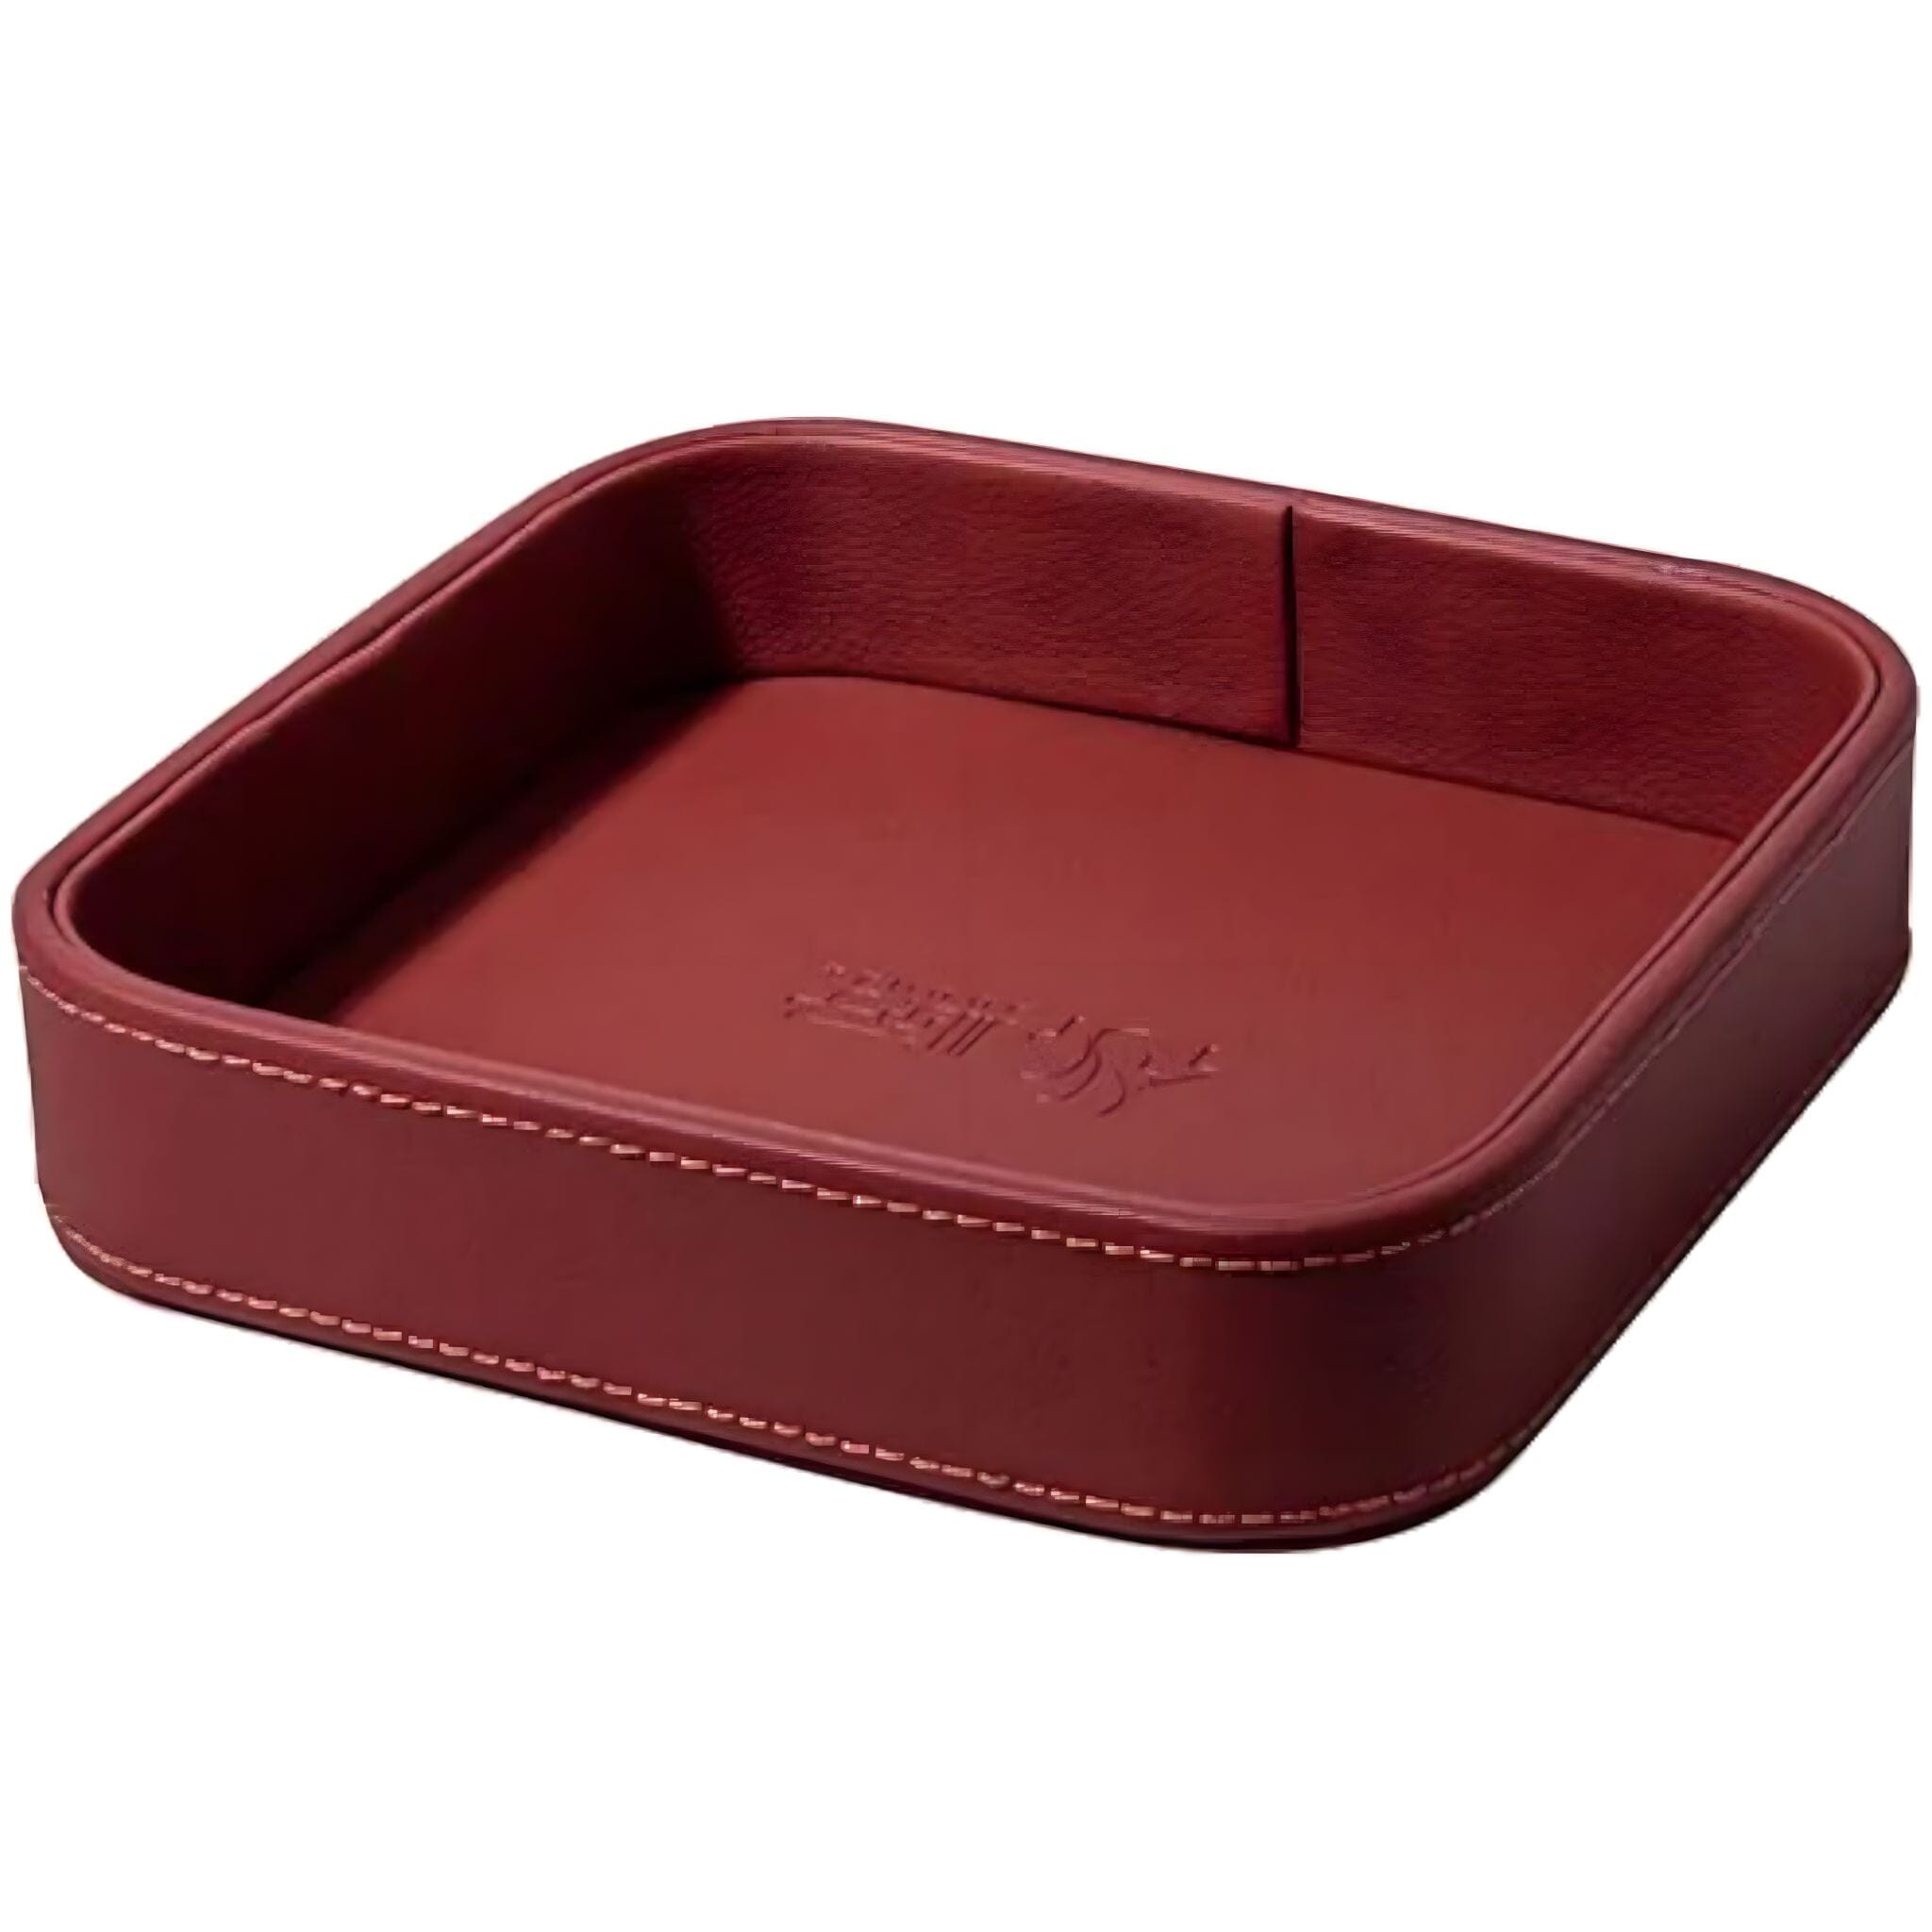 Leather Luxe Organiser Decorative Trays Red 